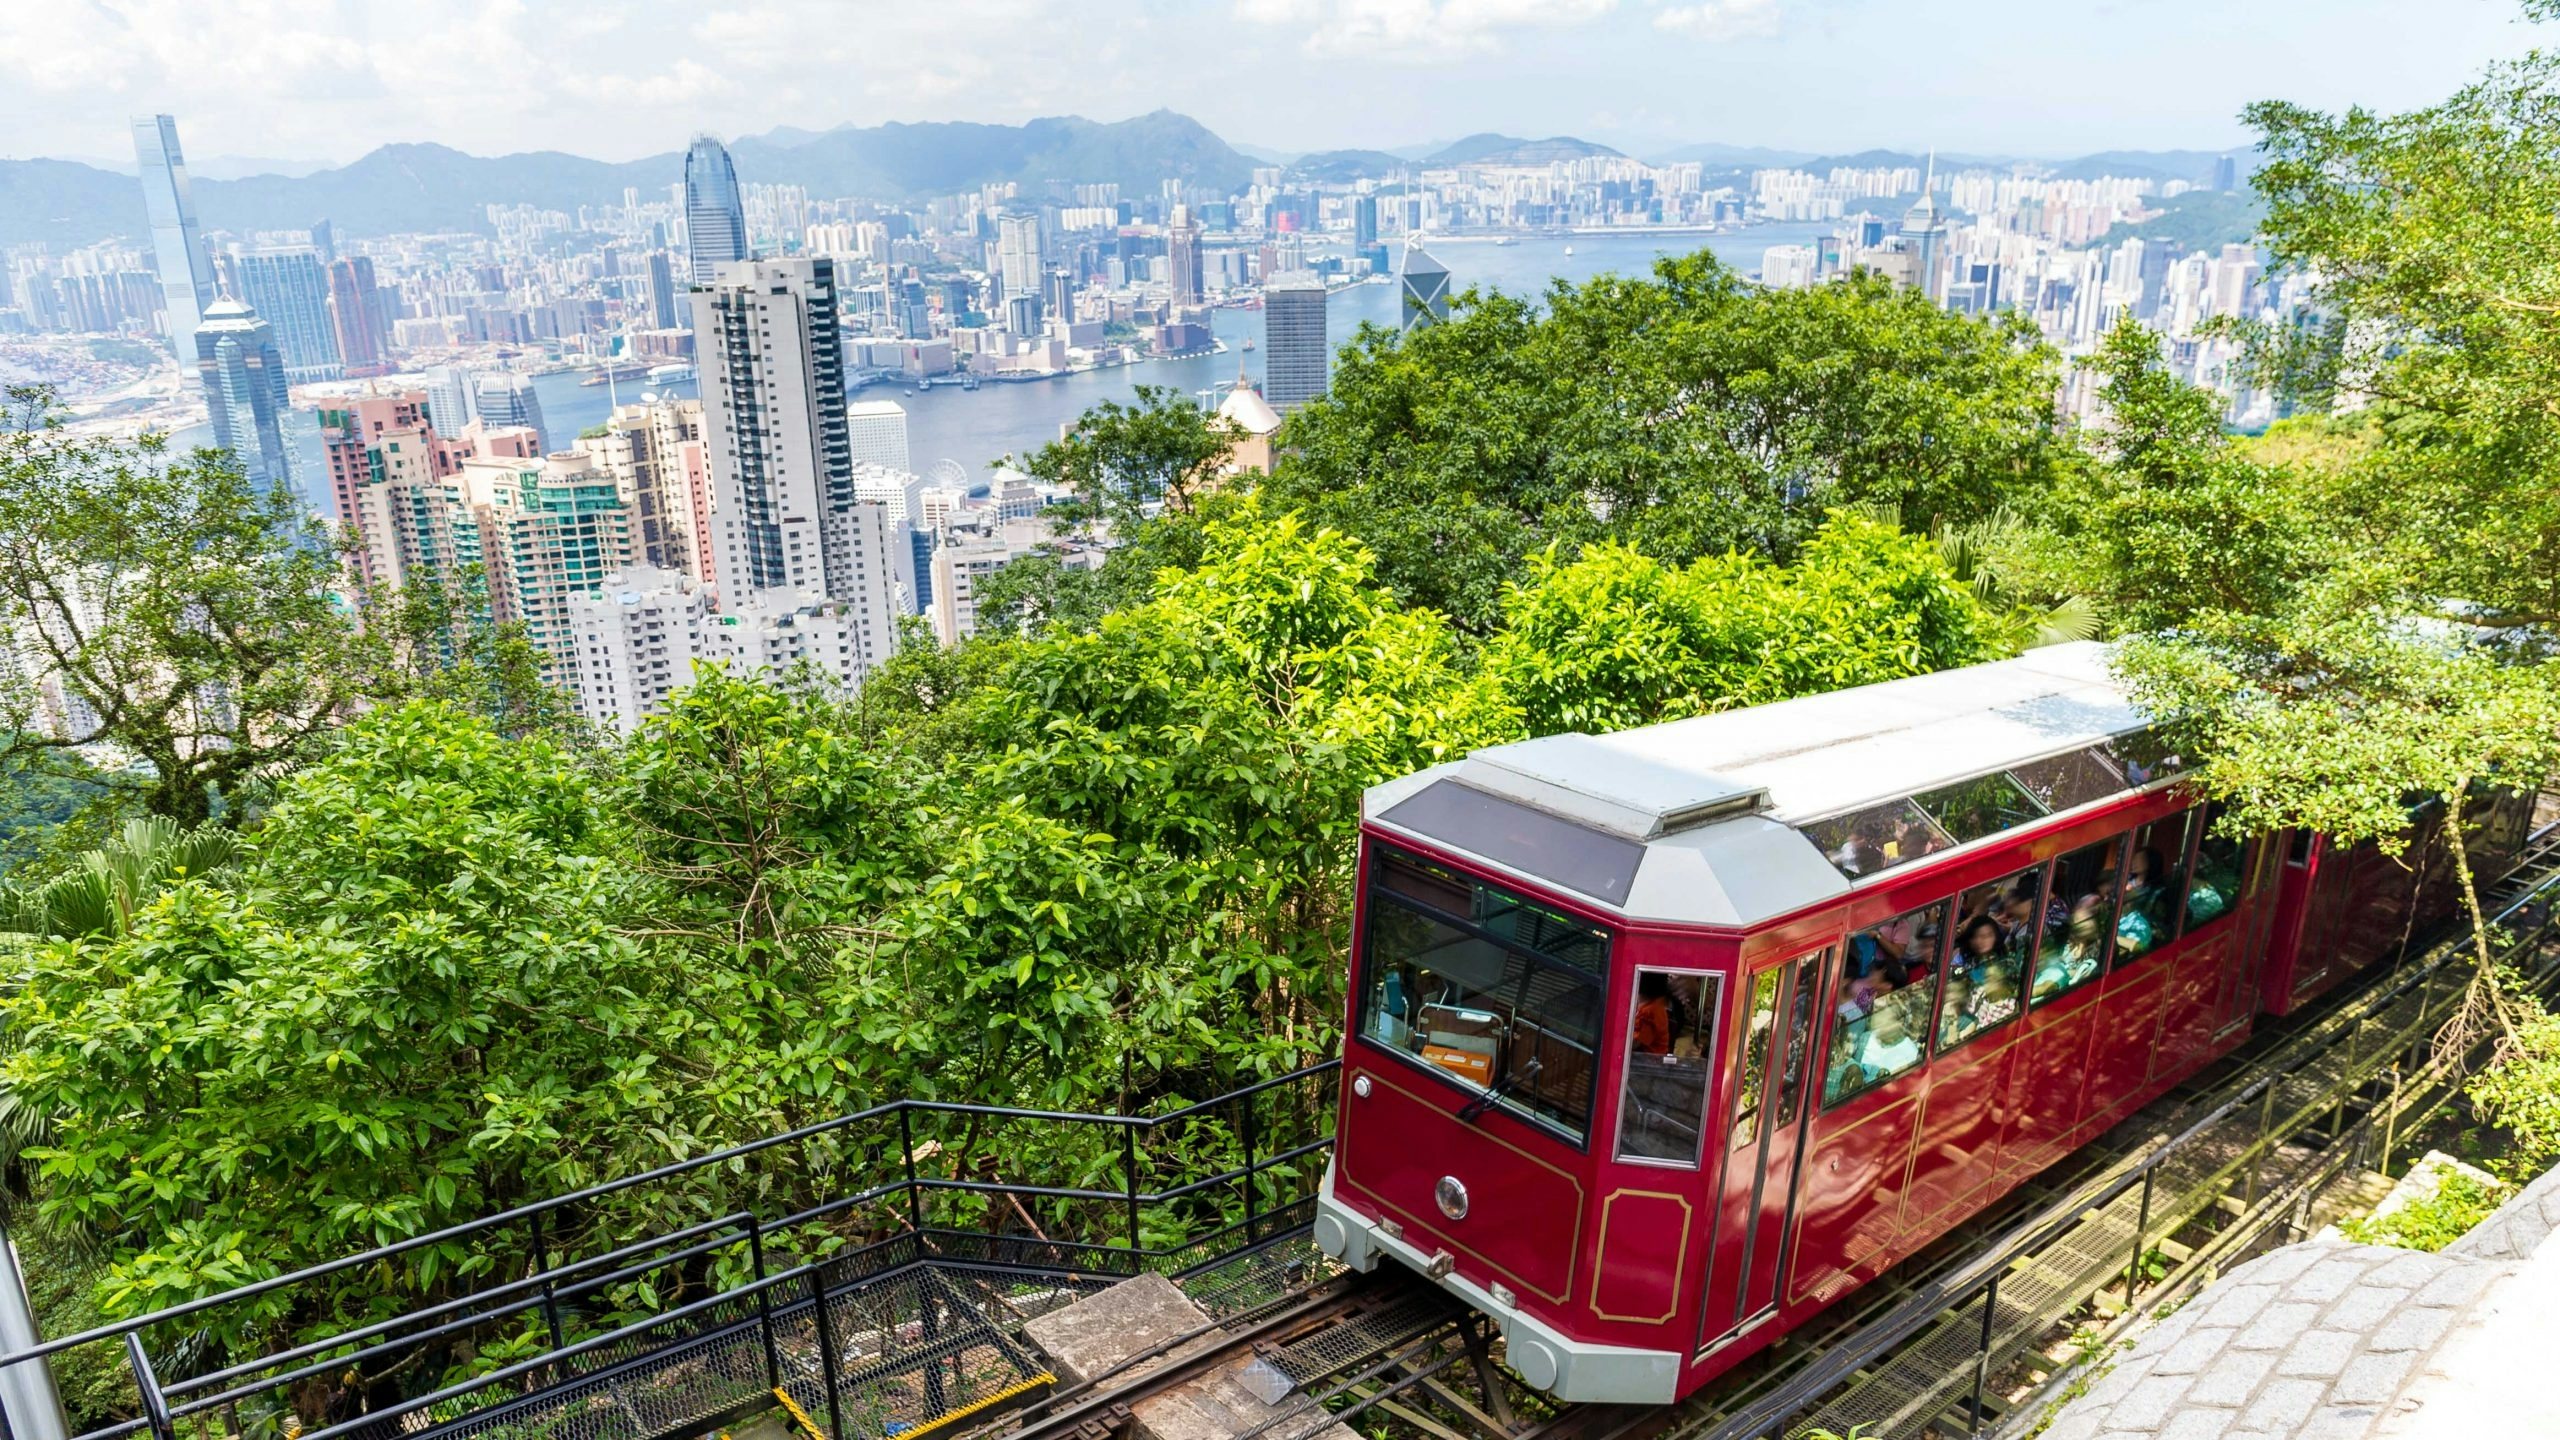 Hong Kong and China’s border has officially reopened. Formerly the world’s most visited city, Hong Kong looks to boost tourism after three years of sluggish growth. Photo: Shutterstock